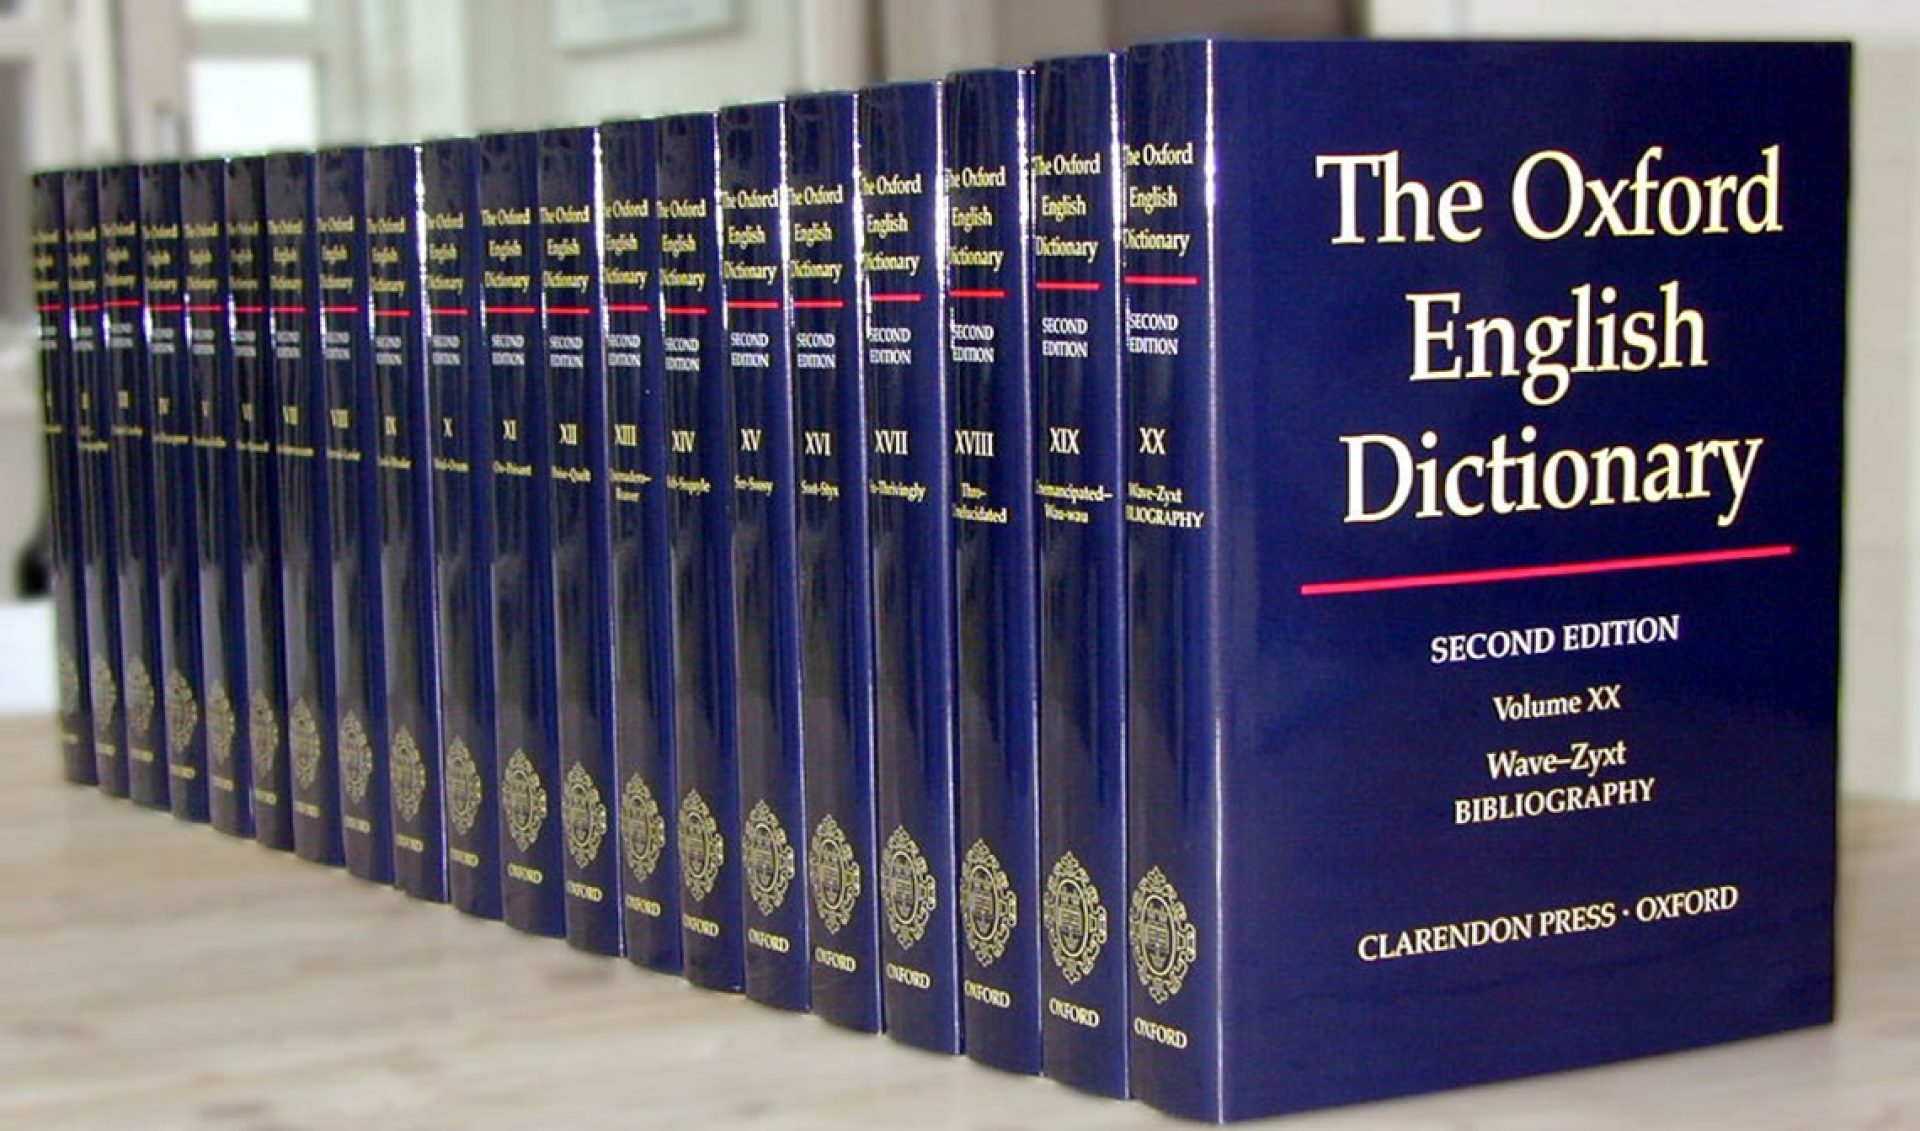 “YouTuber” Is Now A Word In The Oxford English Dictionary